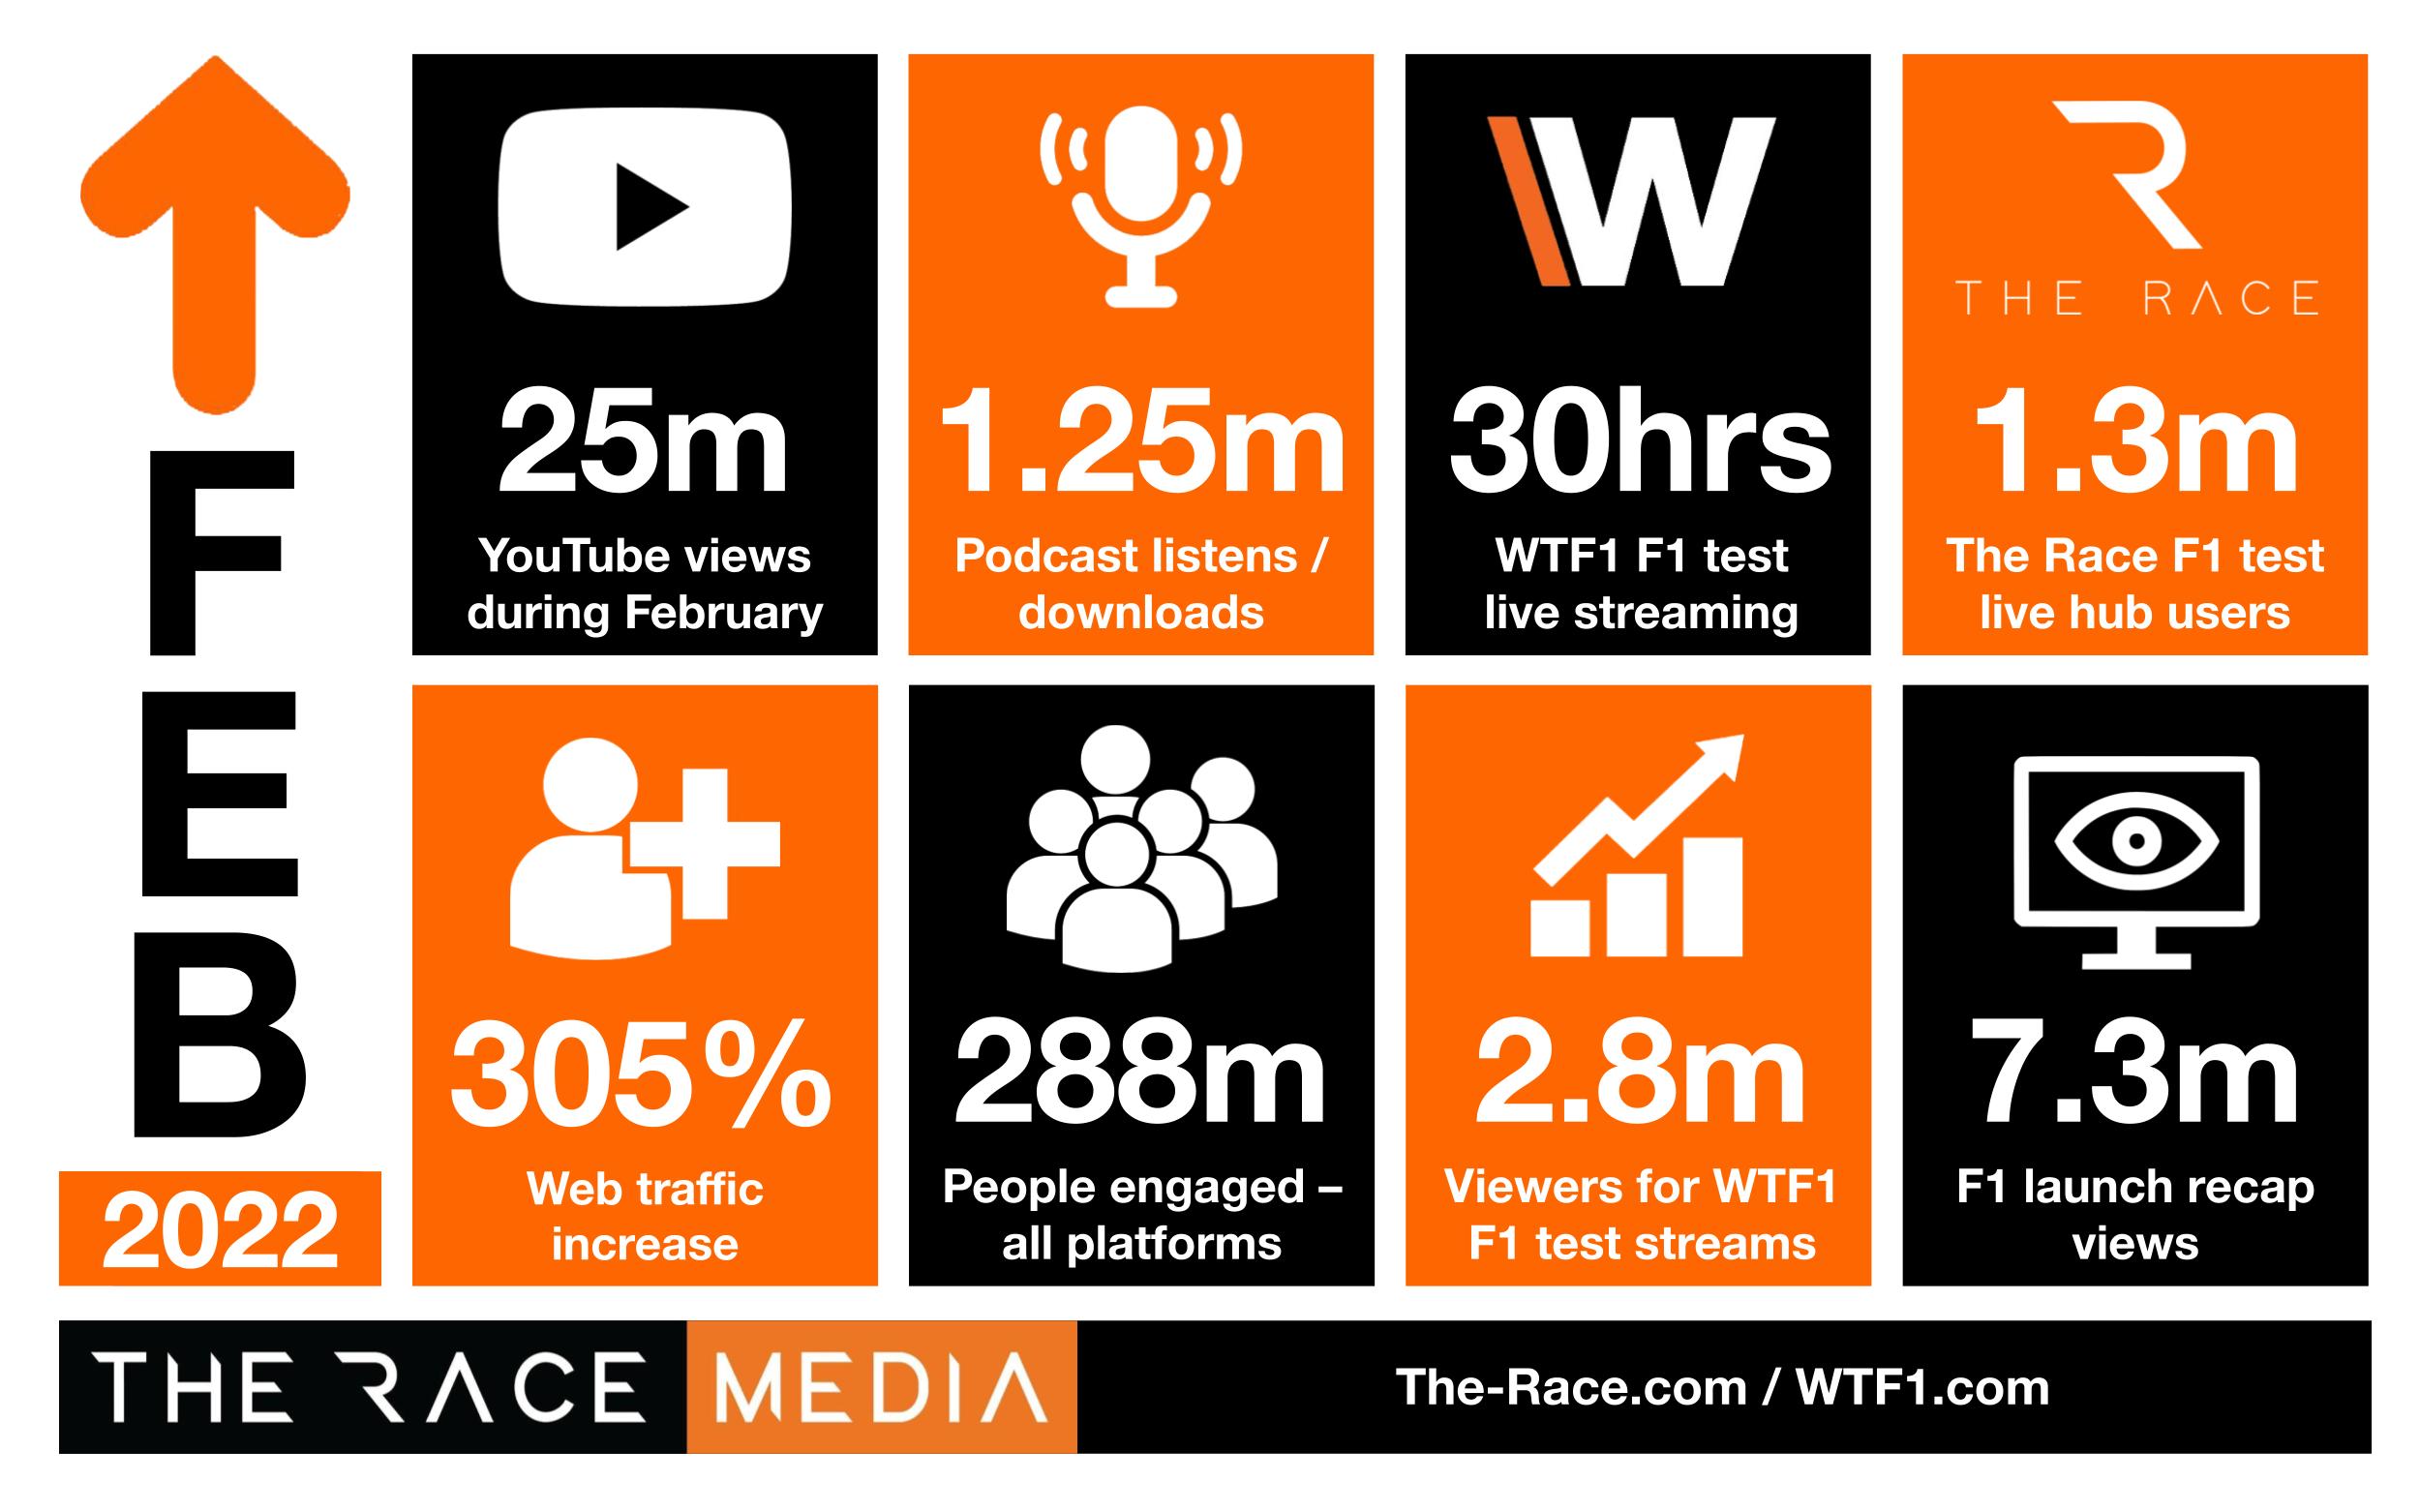 The Race Media dominate F1 pre-season with innovative content-led approaches The Race Media Ltd.